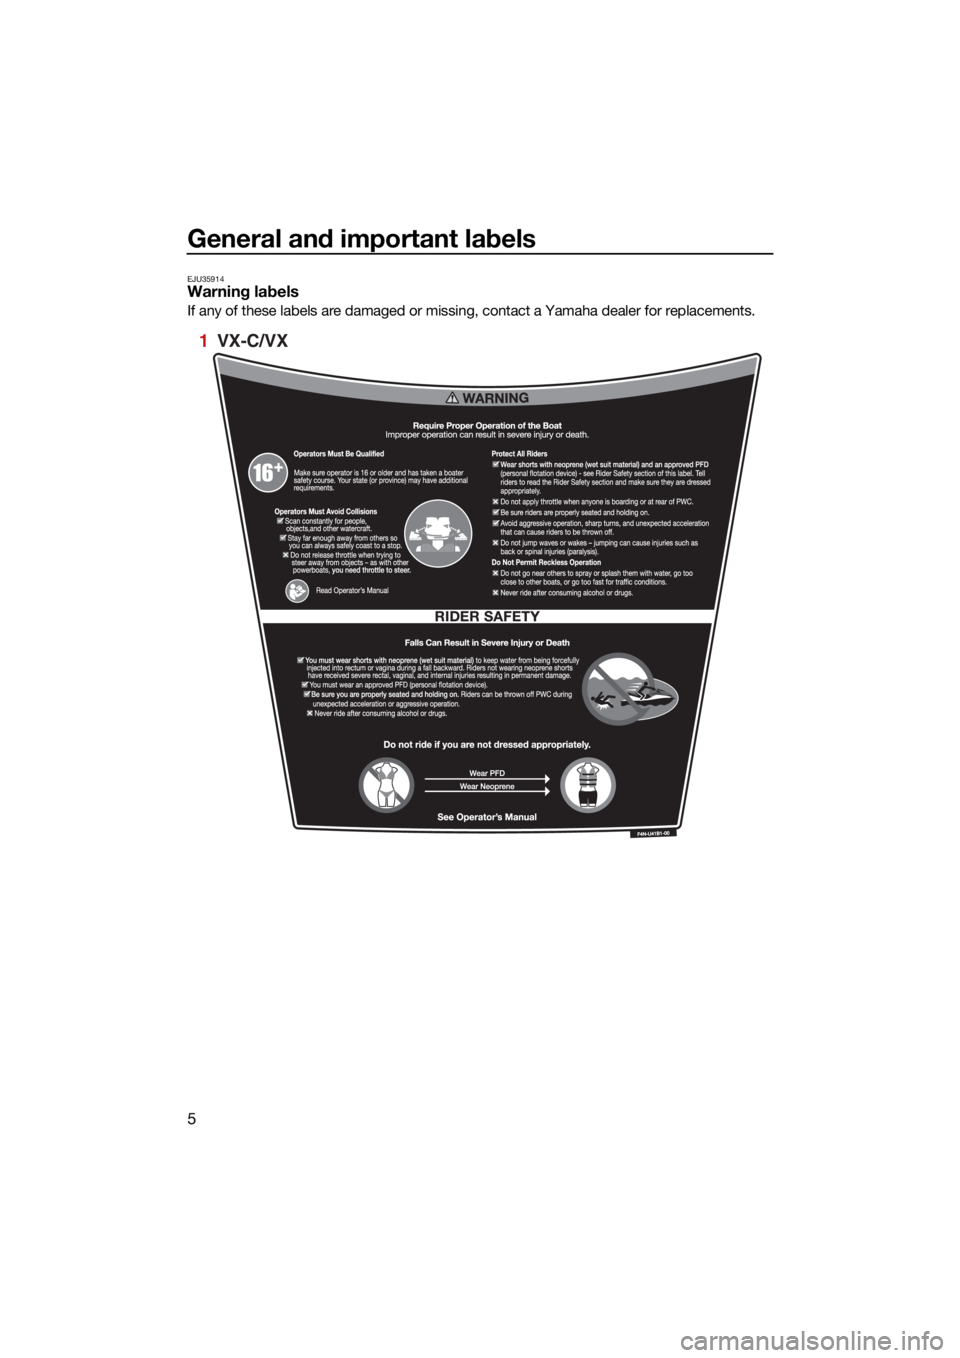 YAMAHA VX CRUISER 2022 User Guide General and important labels
5
EJU35914Warning labels
If any of these labels are damaged or missing, contact a Yamaha dealer for replacements.
1  VX-C/VX
UF4N71E0.book  Page 5  Thursday, August 5, 202